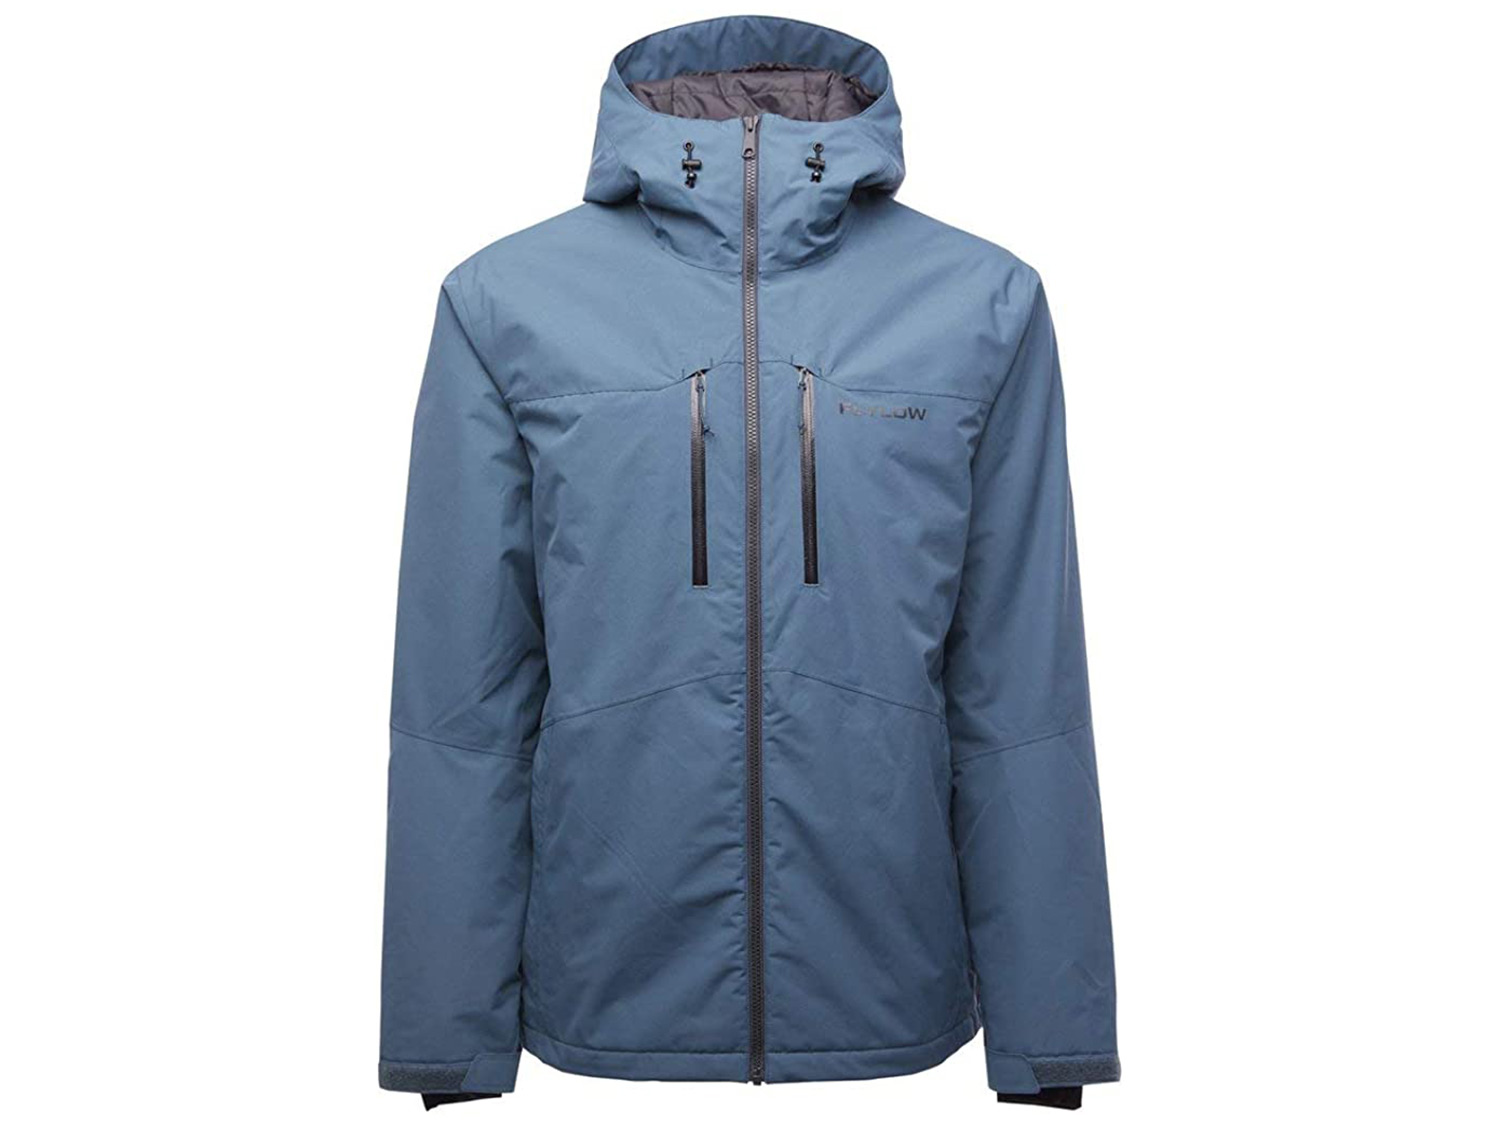 Flylow Roswell Insulated Jacket is one of the best hooded puffer jackets.